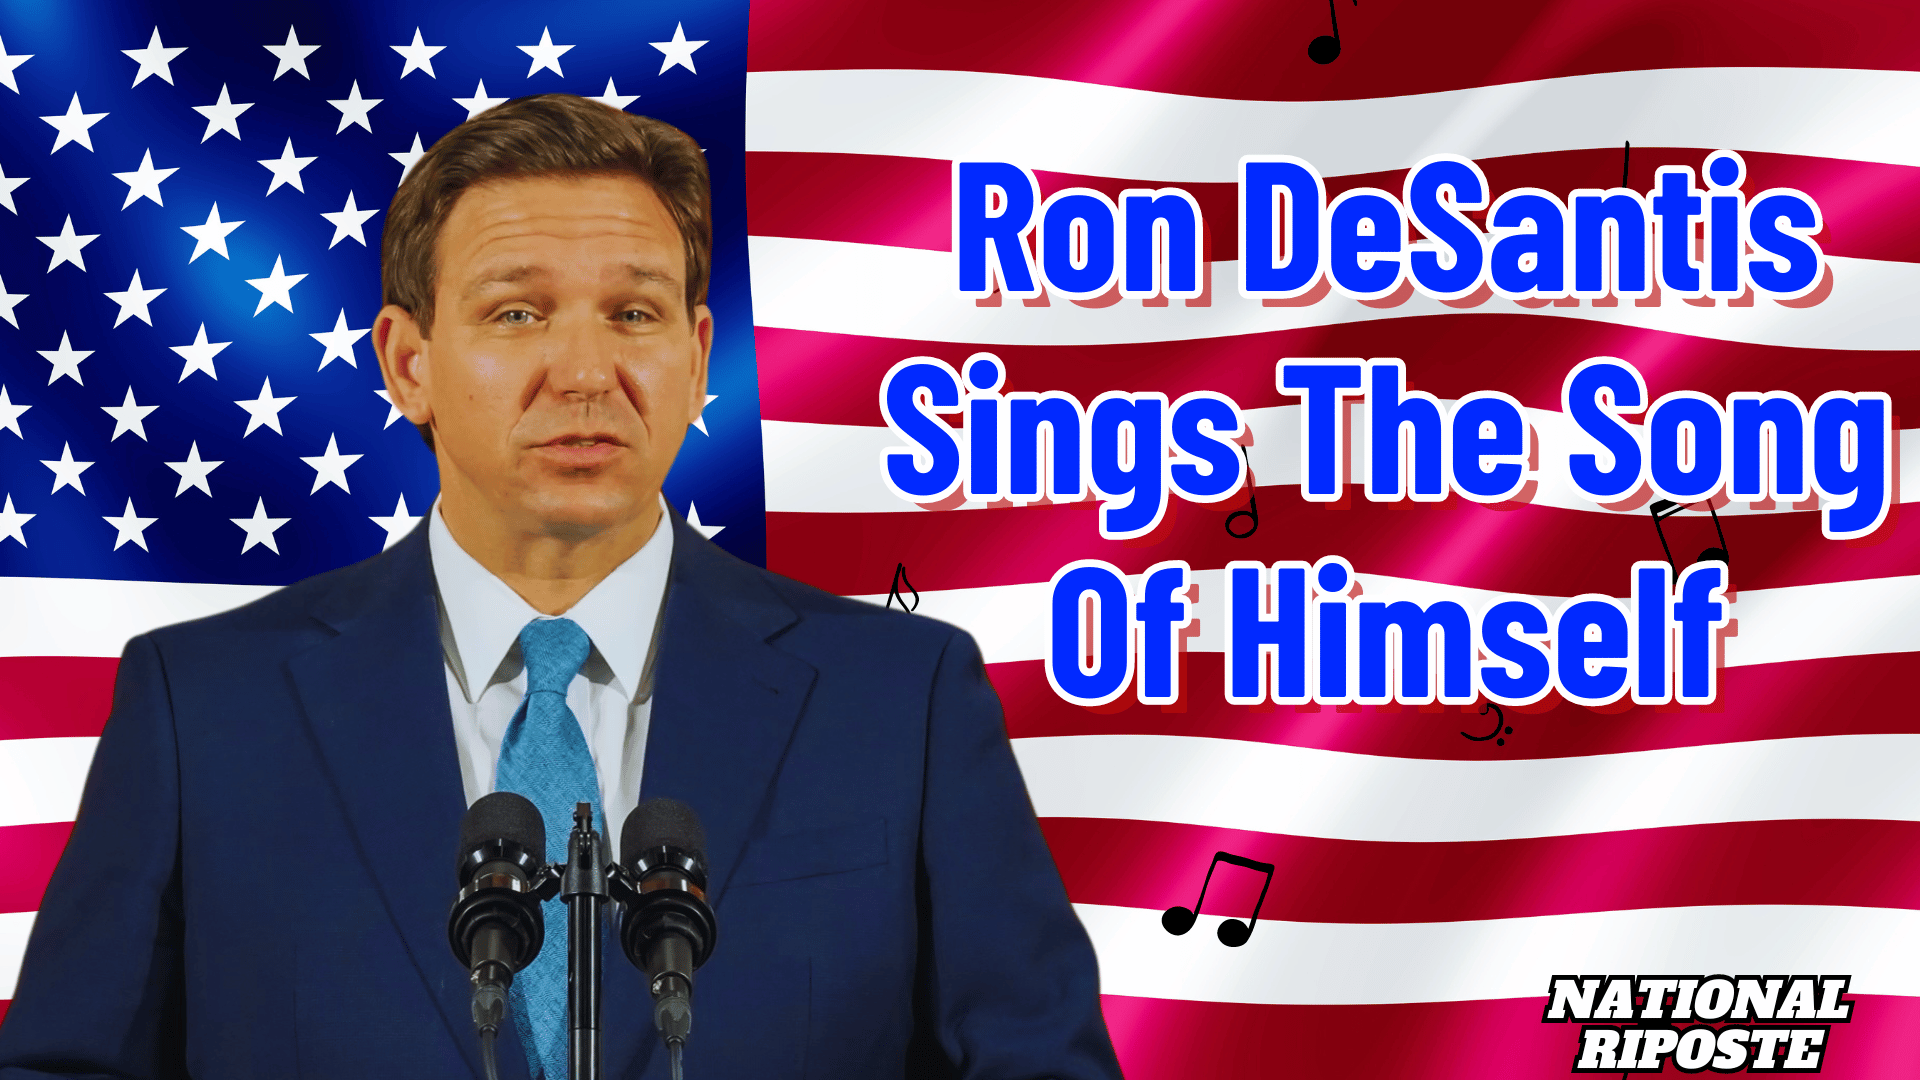 ron desantis sings song of himself featured image